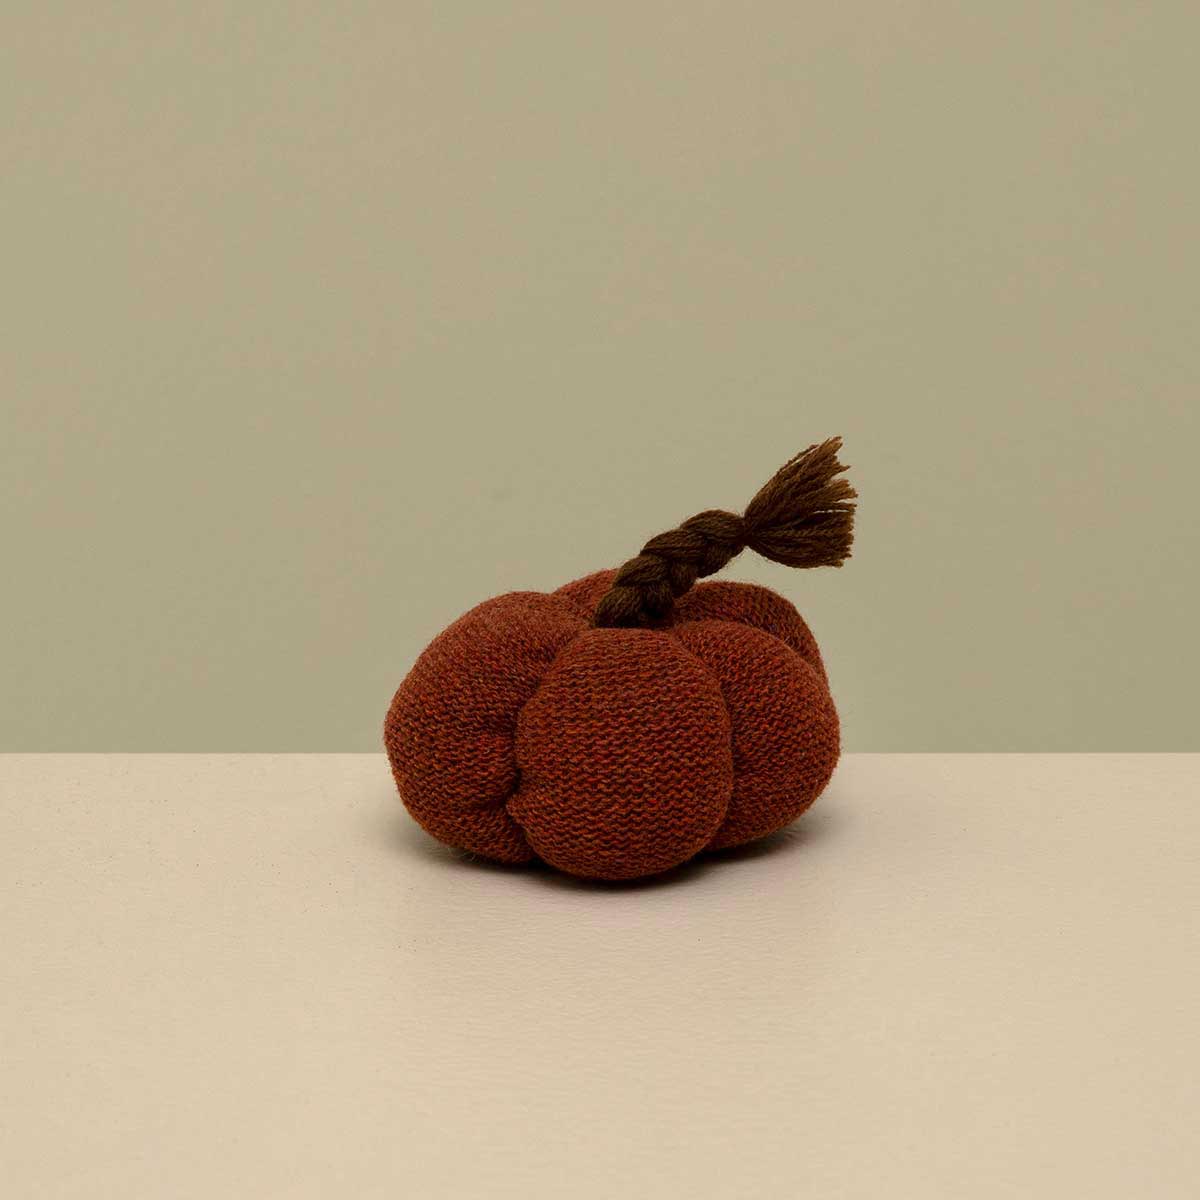 KNIT PUMPKIN PLUSH BURGUNDY WITH BRAIDED STEM SMALL 4"X2.5" - Click Image to Close